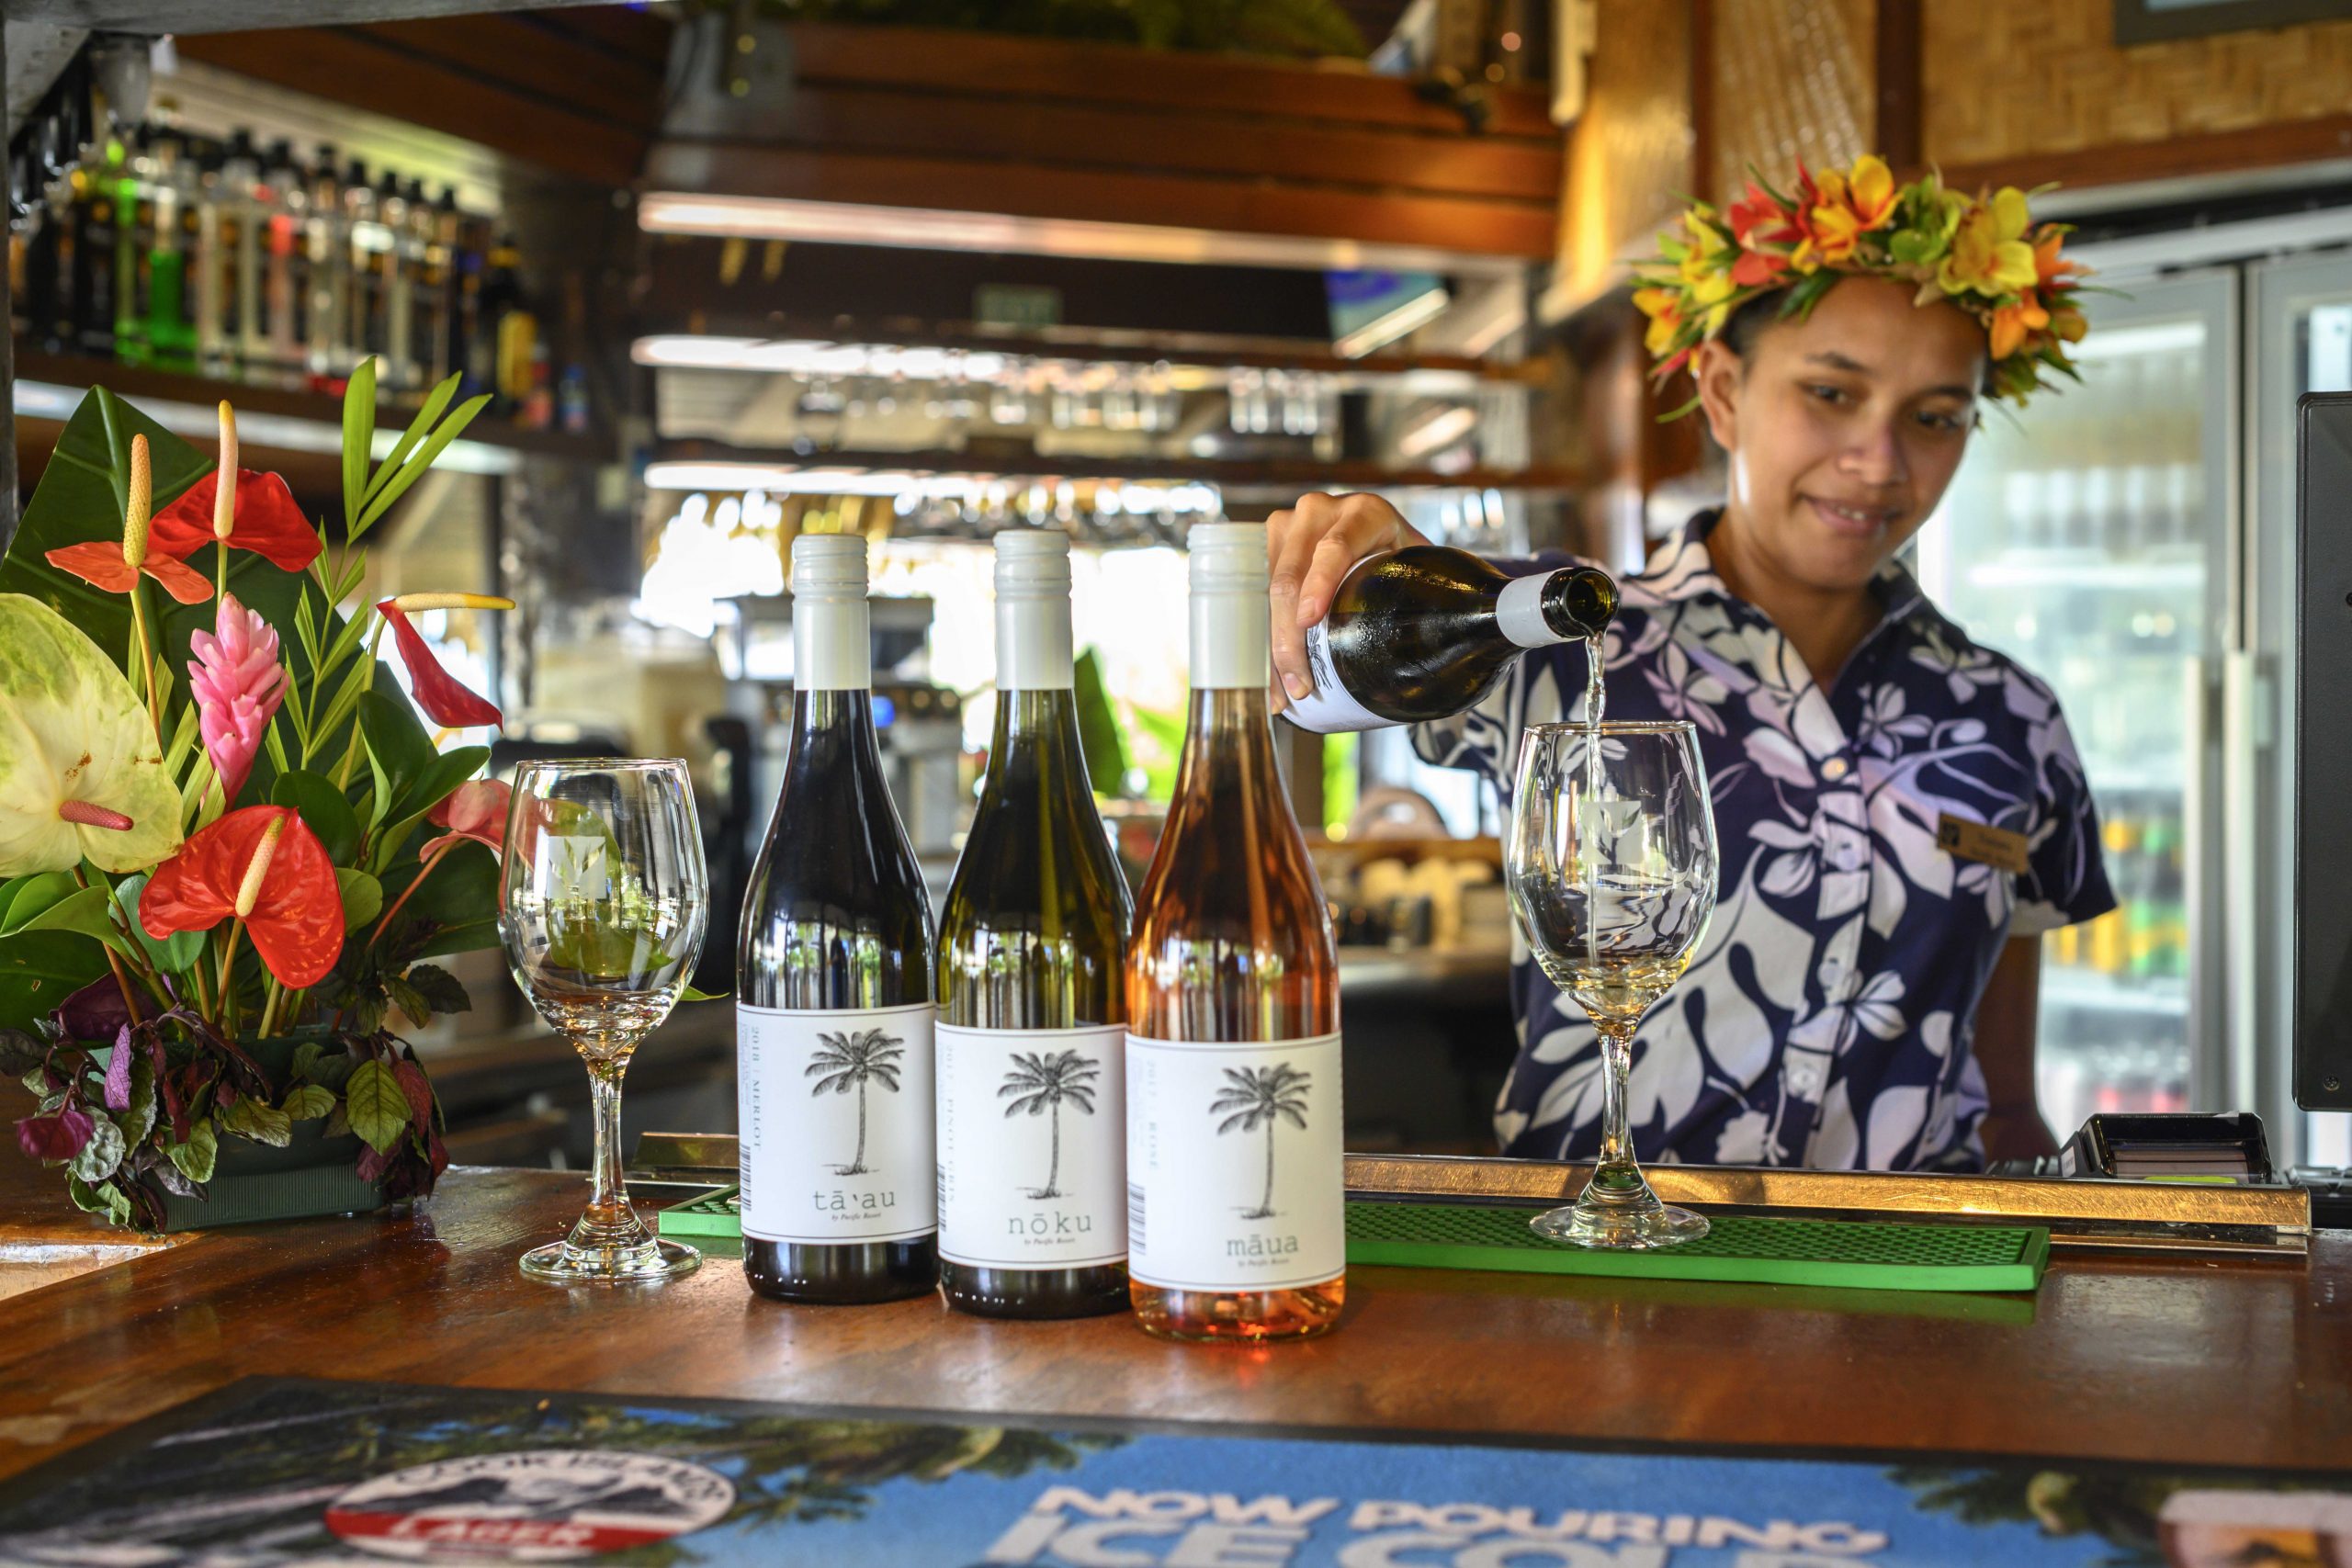 Resort bar attendant showcasing her wine-pouring skills and the variety of wine options available at the bar